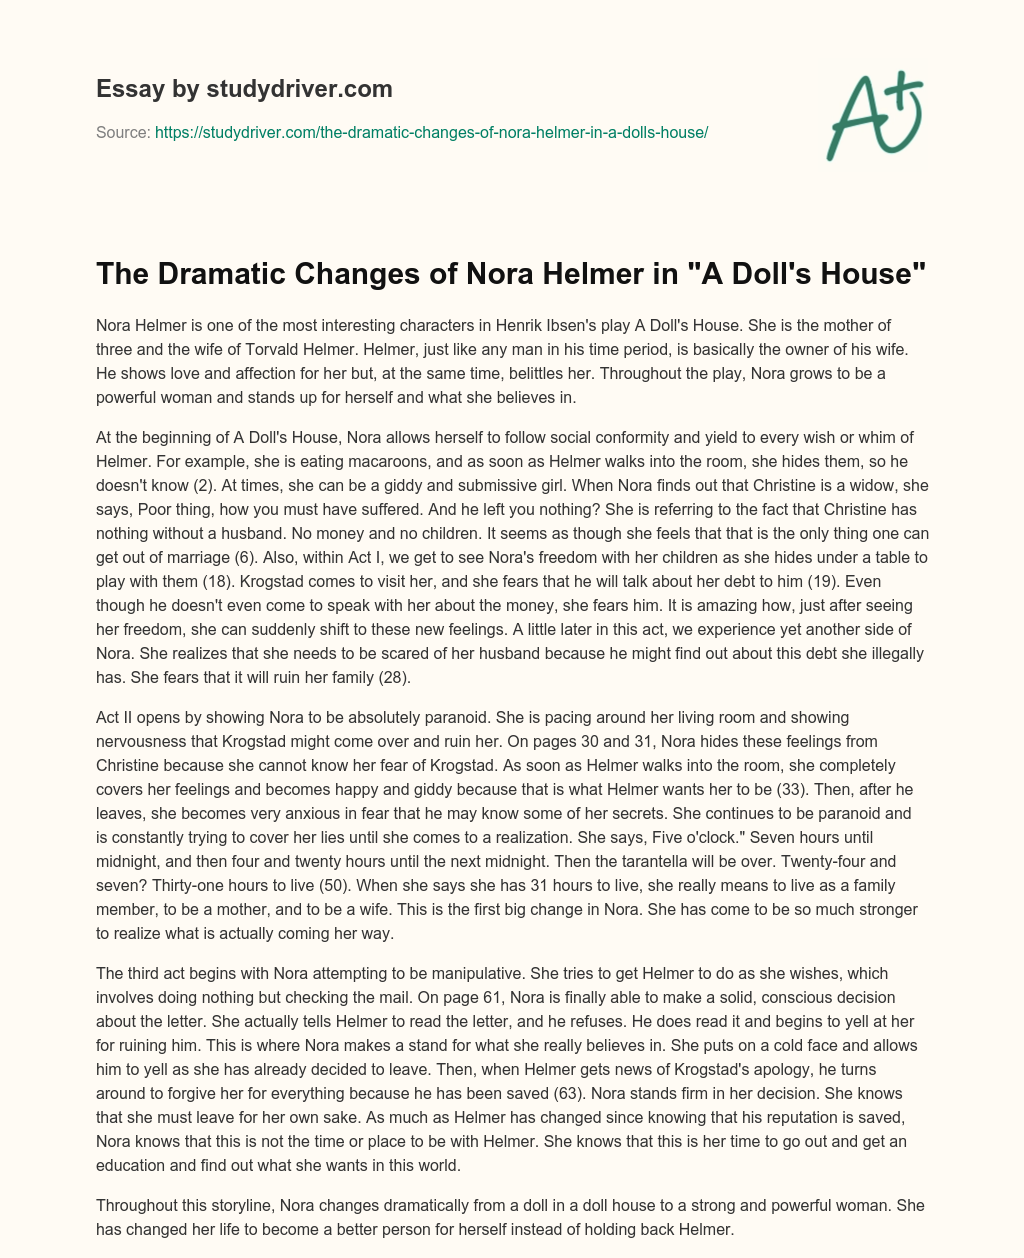 The Dramatic Changes of Nora Helmer in “A Doll’s House” essay